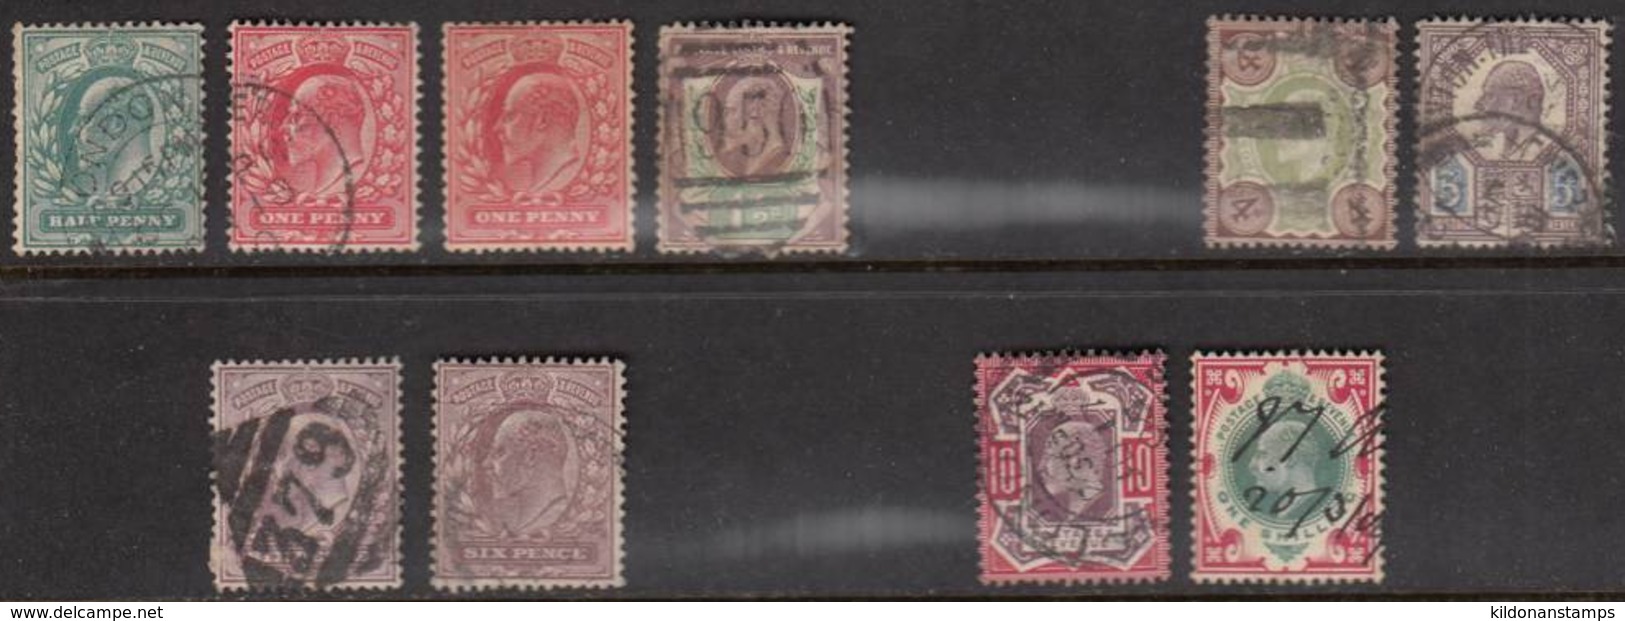 Great Britain 1902 Mint Mounted/cancelled, See Notes, Sc# 127-129,133-134,135a,135b,137a,140 (incl 128a) - Usati